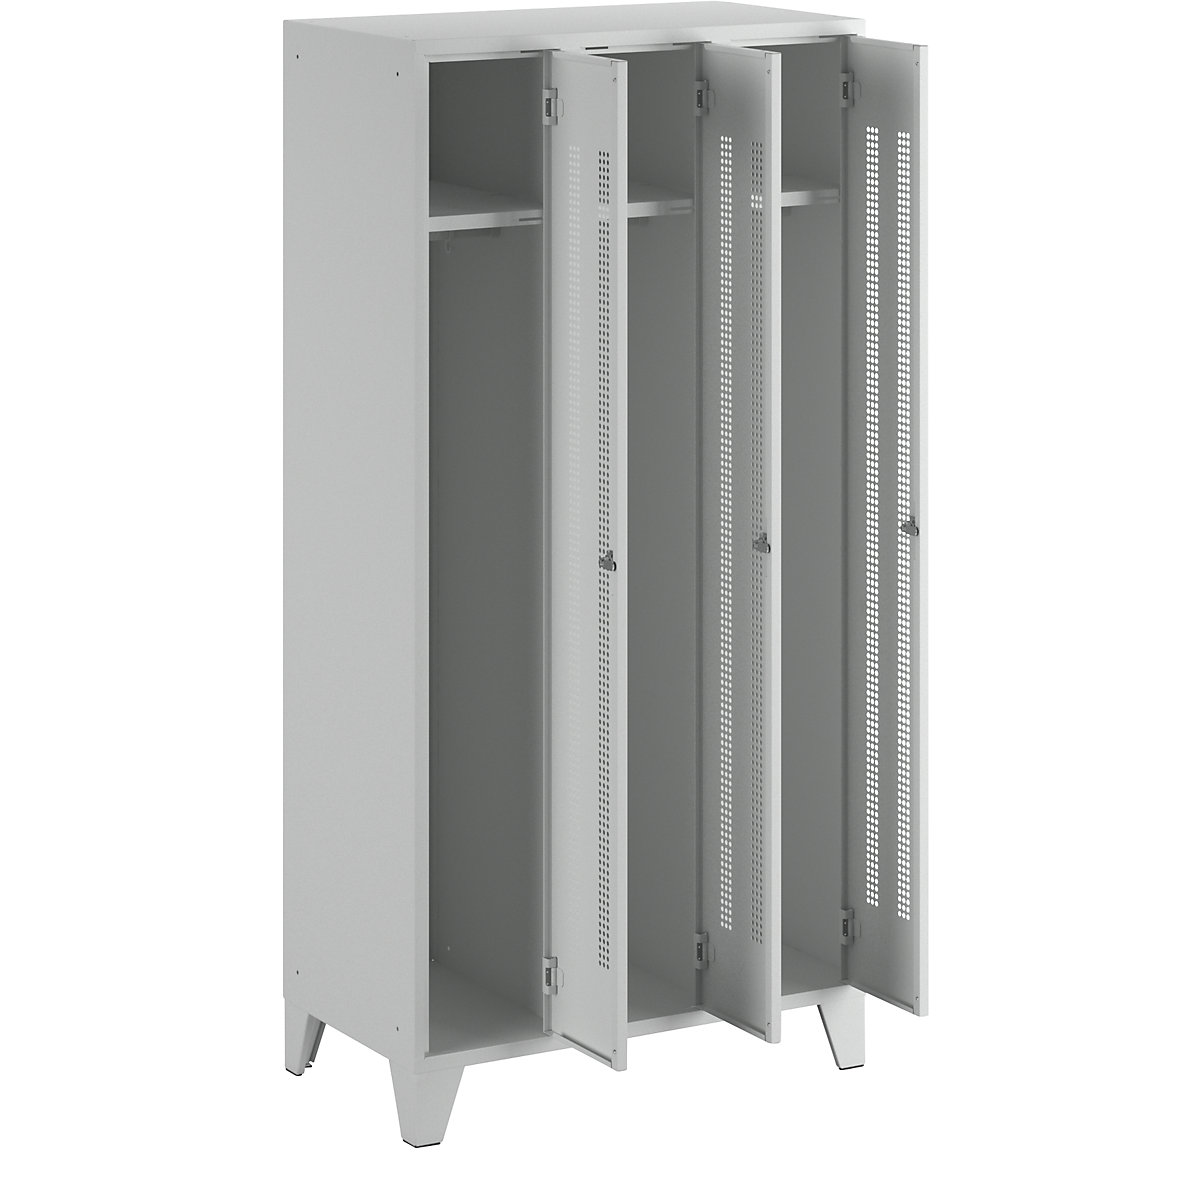 Steel locker with stud feet – Wolf, full height compartments, perforated sheet metal doors, compartment width 300 mm, 3 compartments, light grey-32